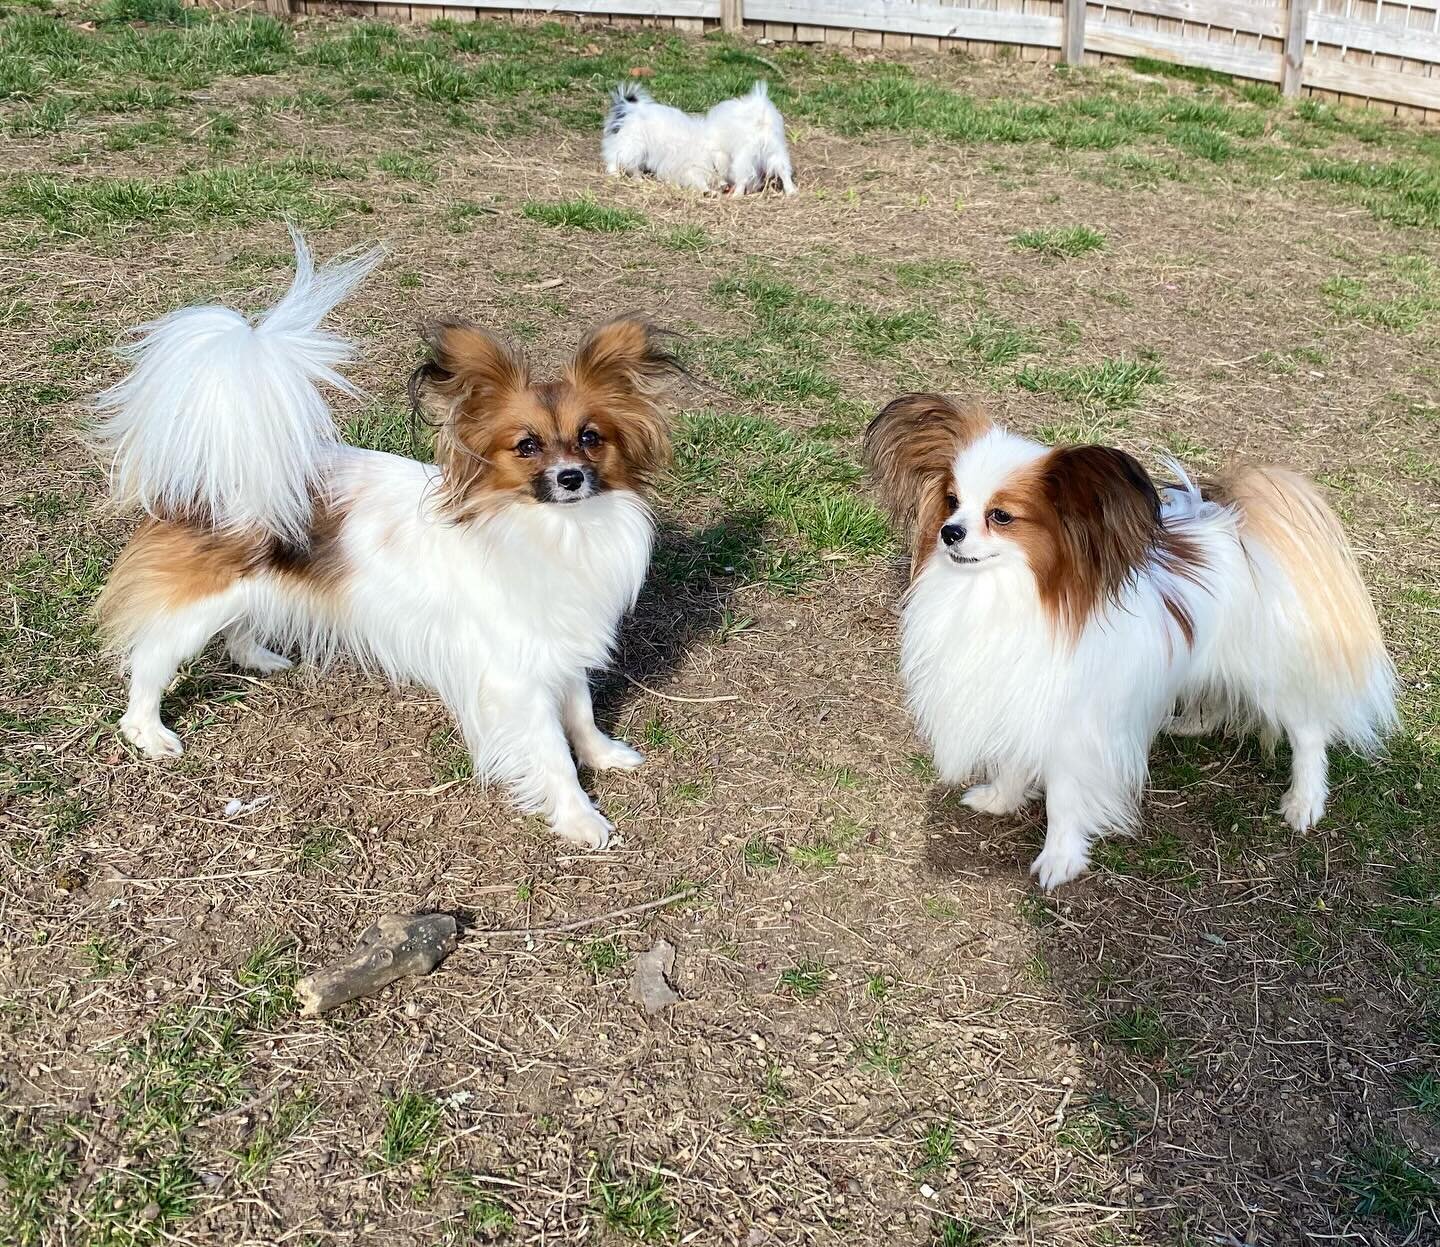 Best friends, Hazel and Amarillo #papillon #papillons #papillonsofinstagram #papillonlove #papillondog #papillonpuppy #papillonlife #doglife #dogsofinstagram #dogs #doglove #sablewings